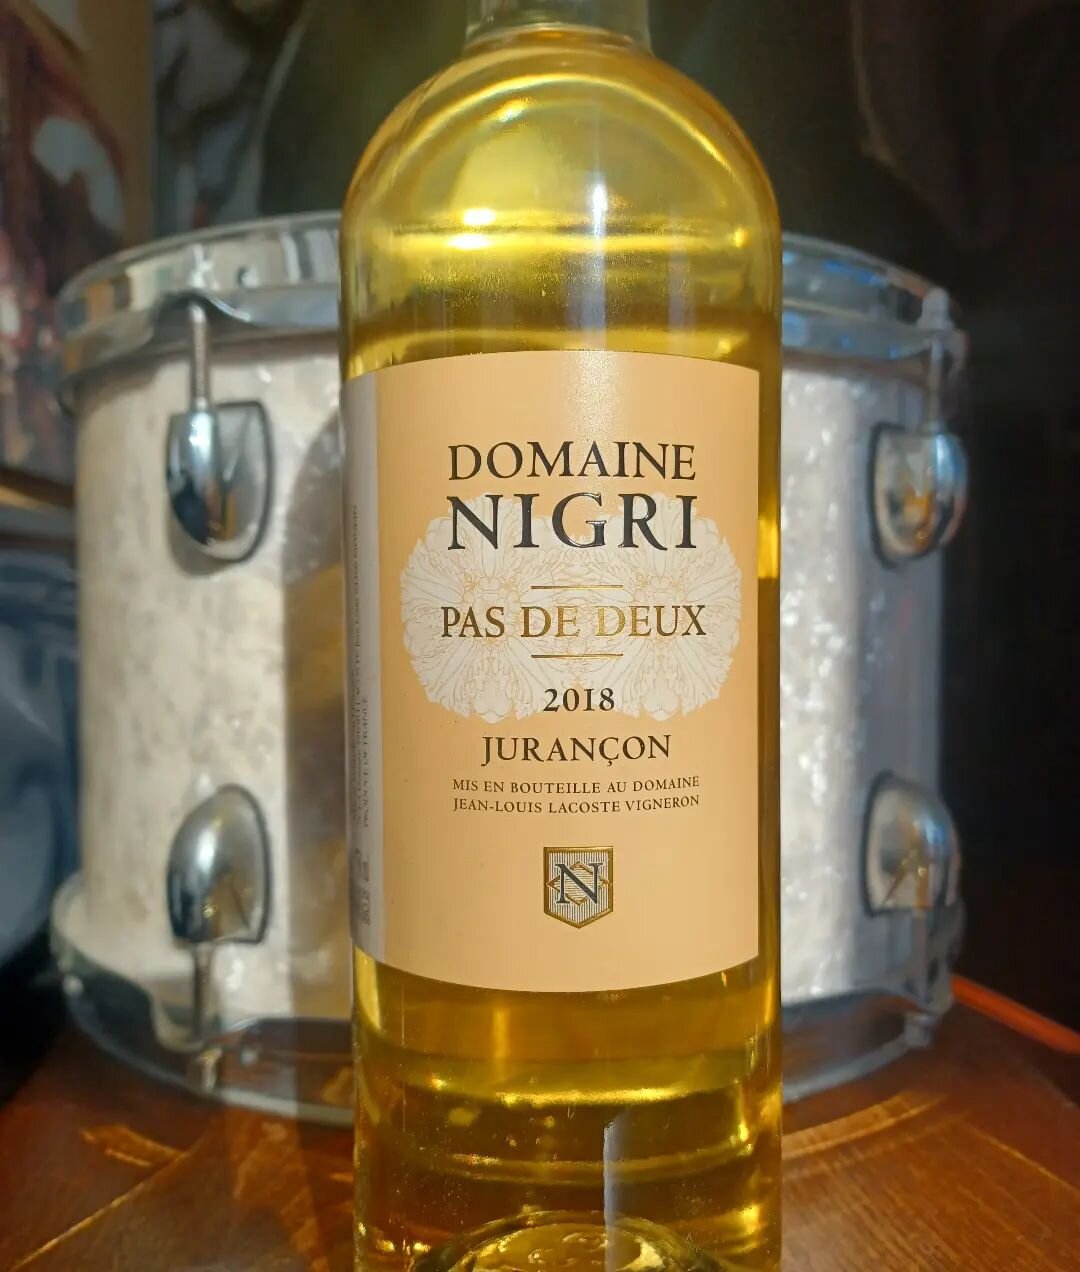 A little bit of liquid sunshine.  Perfect for your next blue cheese or fois gras emergency. 

🍋🥭🍯🫚🥁

Domaine Nigri 'Pas de Deux' Juran&ccedil;on 2018. 

Producer est. 1685
Foothills of the Pyreneess 
Gros Manseng (in stainless) and
Petit Manseng